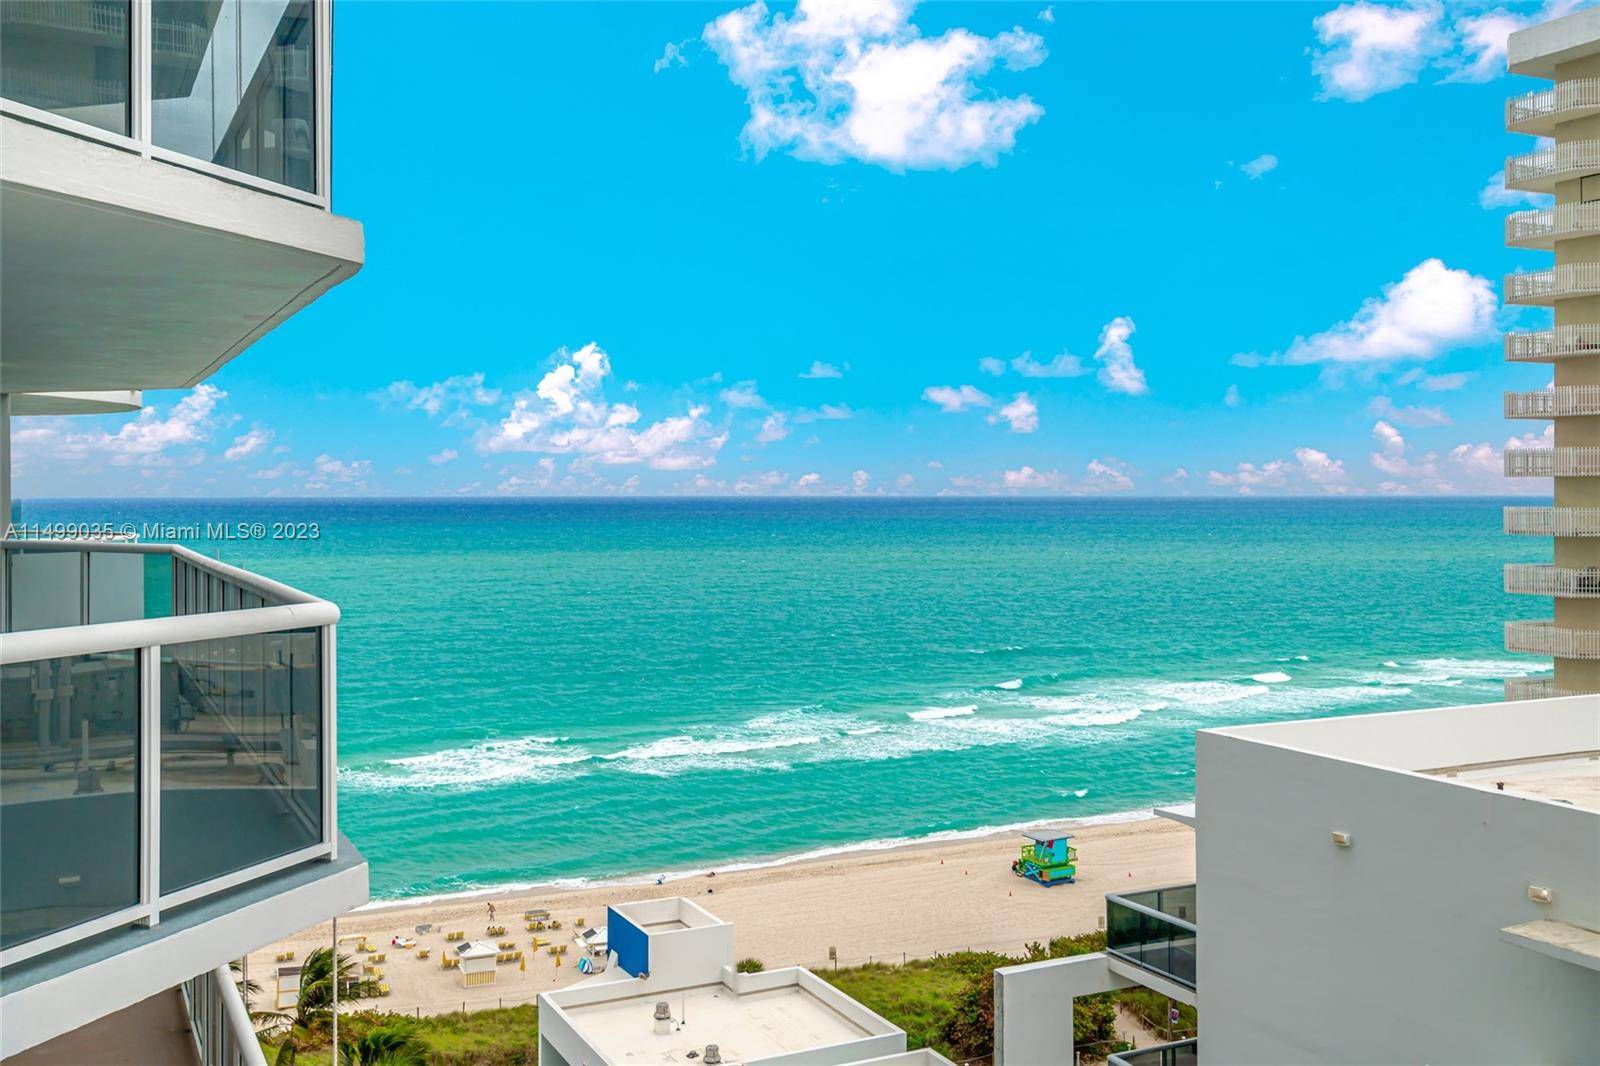 LA GORCE PALACE 2 BED 2 BATH FLOOR TO CEILING ROUNDED GLASS IN LIVING ROOM NICE VIEWS OF OCEAN AND BAY FURNISHED 2 BALCONIES WASHER DRYER INSIDE UNIT BEACH UMBRELLA ...